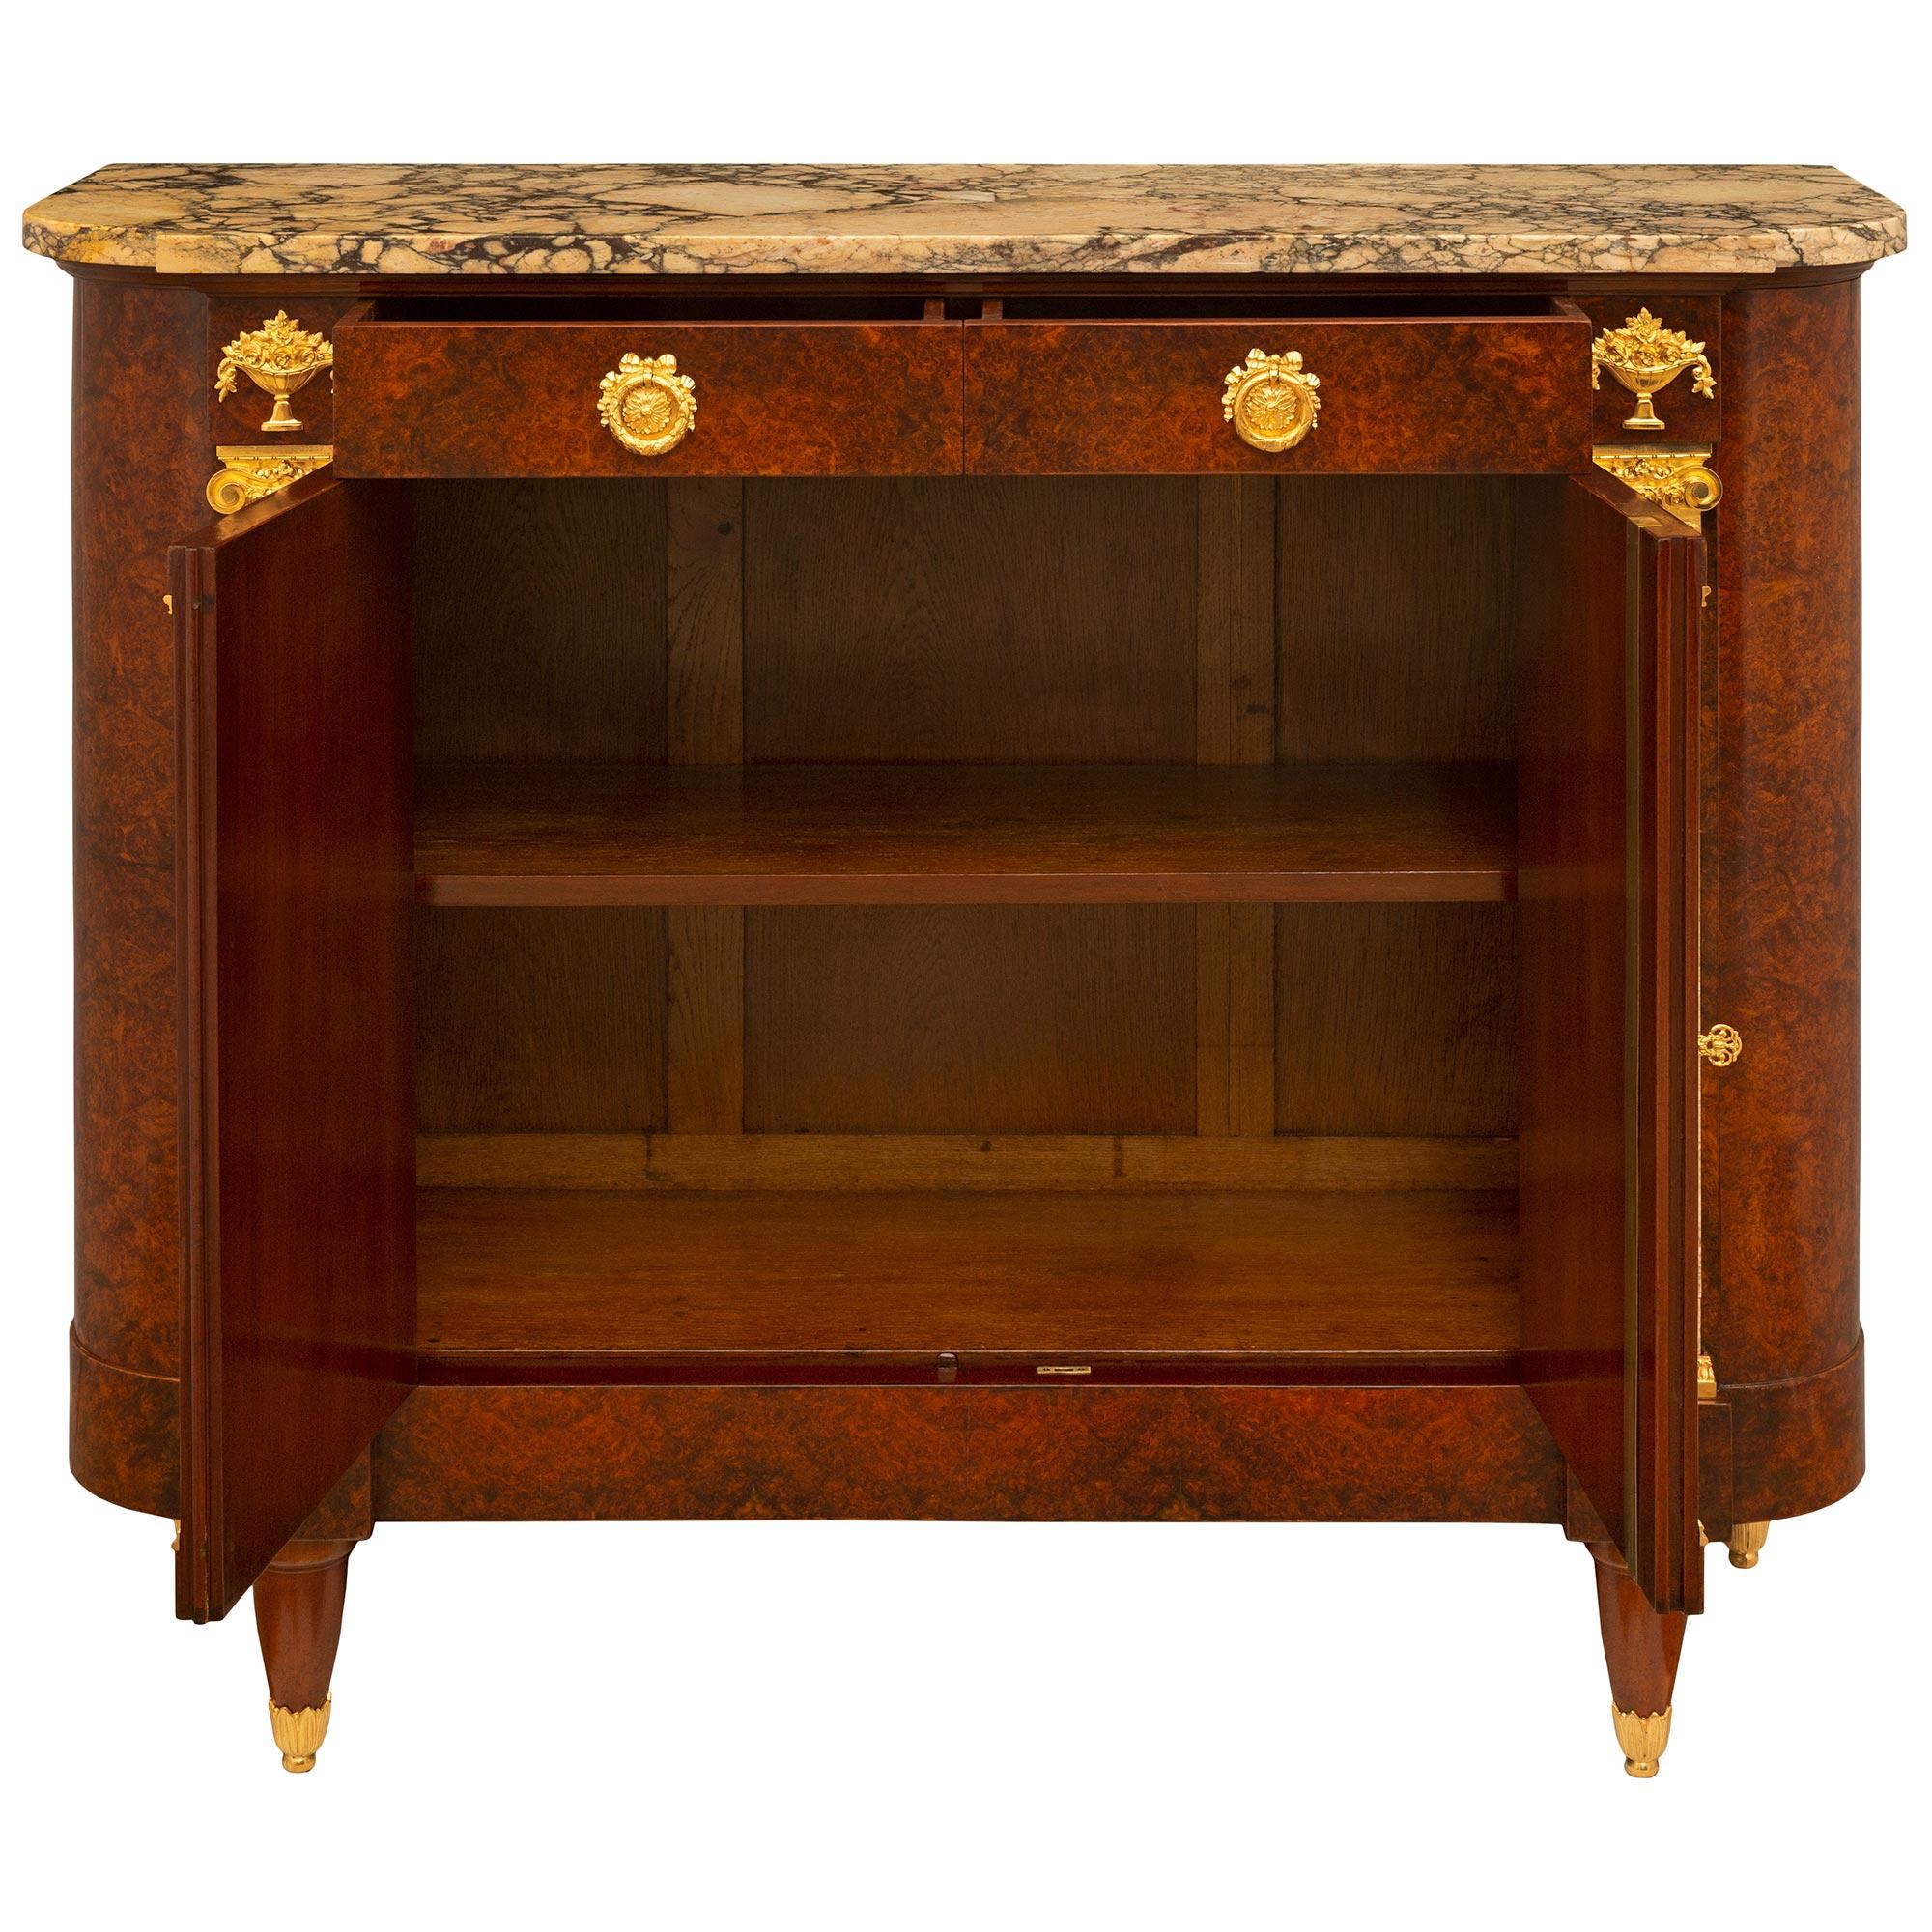 A striking French 19th century Louis XVI st. burl Walnut, ormolu, Sarrancolin and Brèche marble buffet. The two door two drawer buffet is raised by elegant stout circular fluted feet with fine foliate fitted mottled sabots below impressive and most